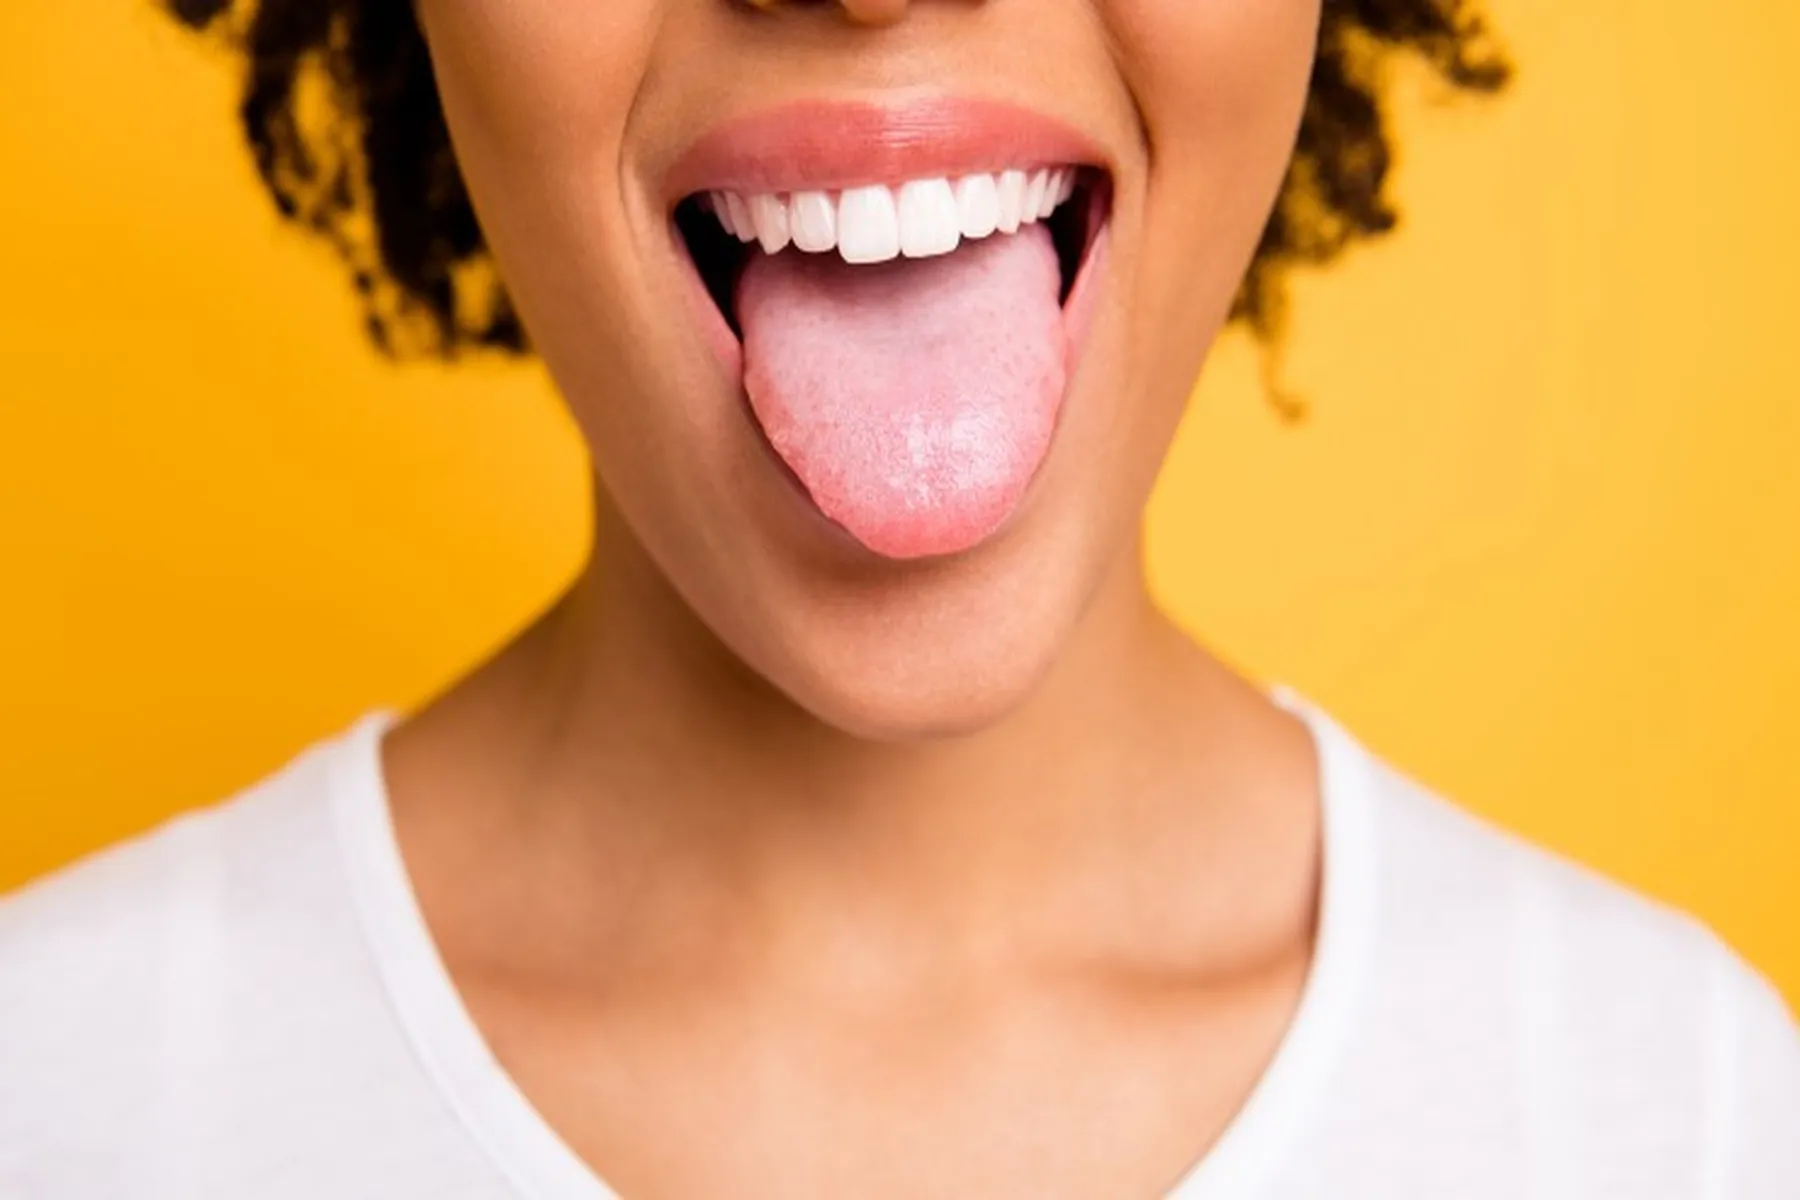 Woman sticking out her tongue.